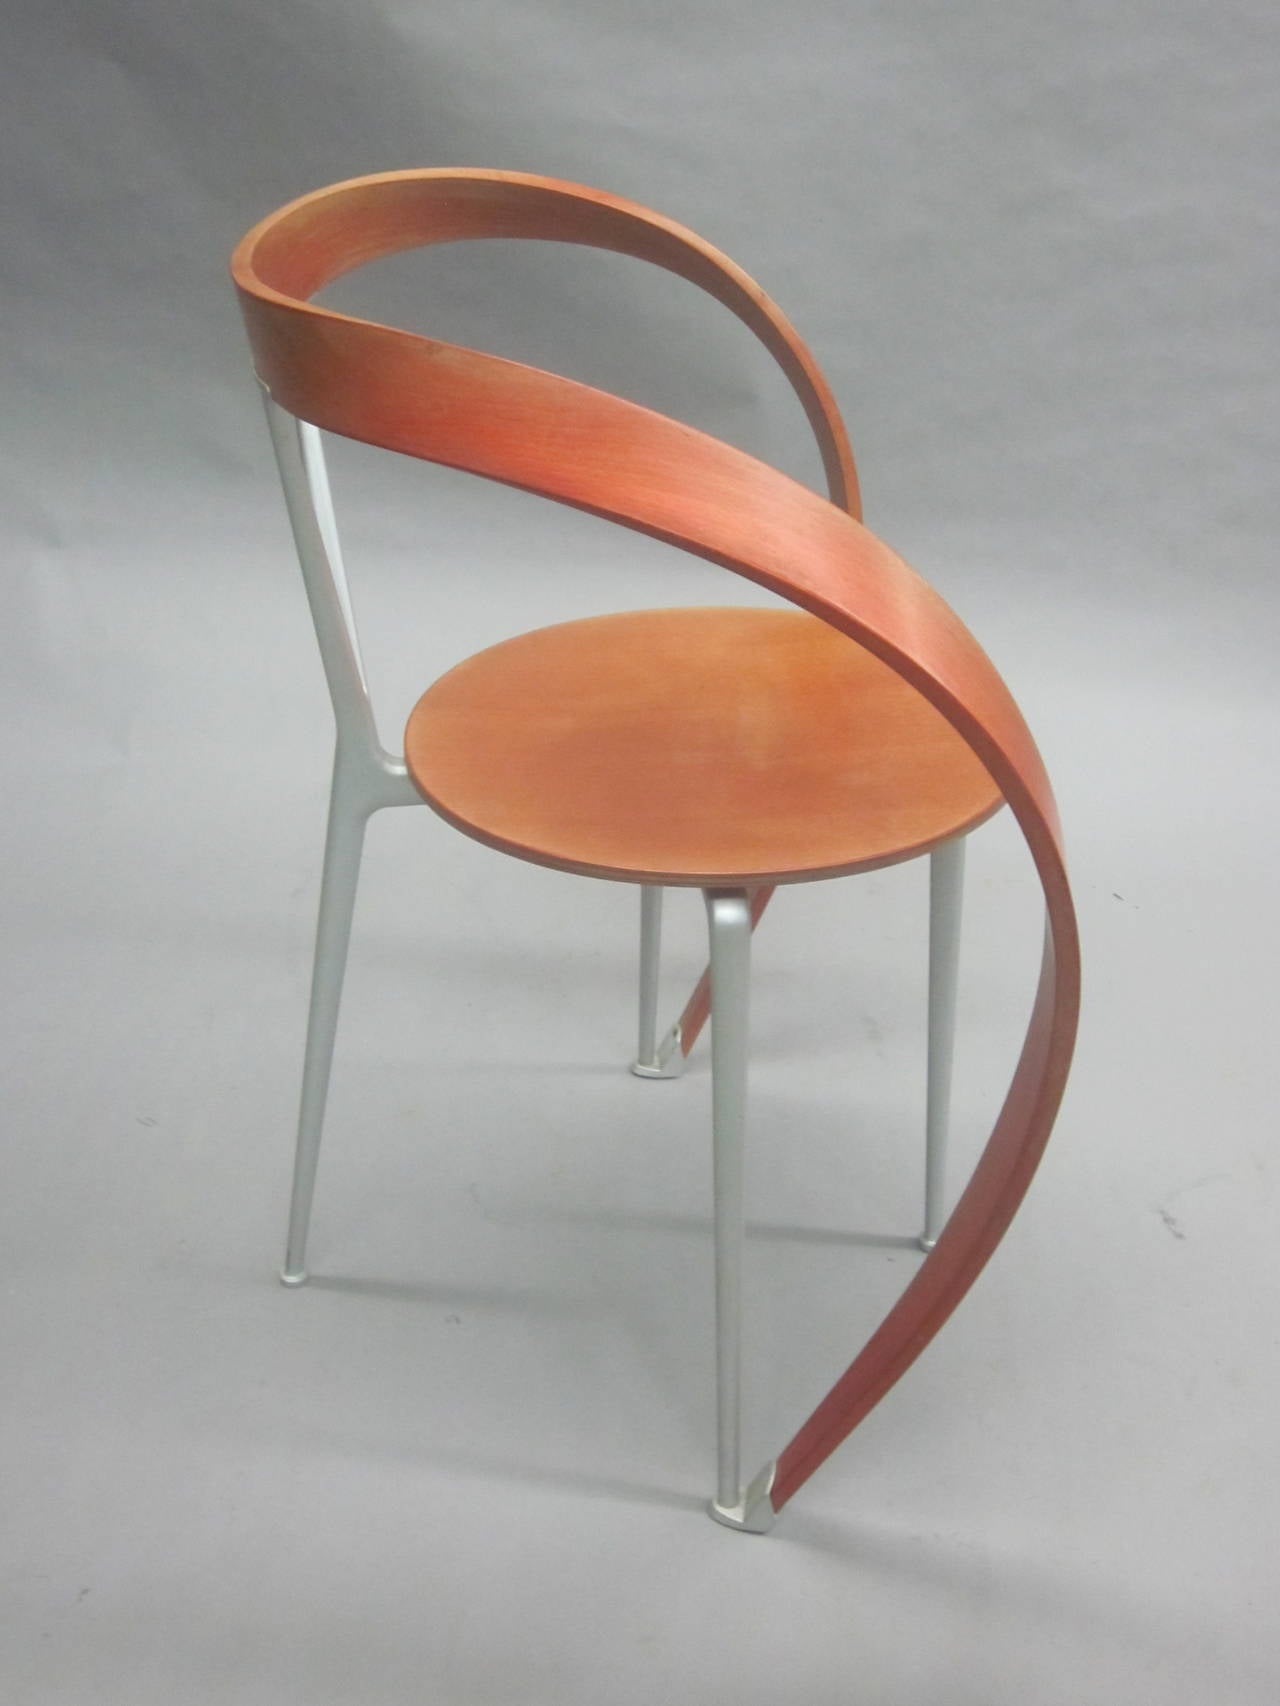 Italian Design / Mid-Century Style Modern Lounge Chair by Andrea Branzi, 1993 In Good Condition For Sale In New York, NY